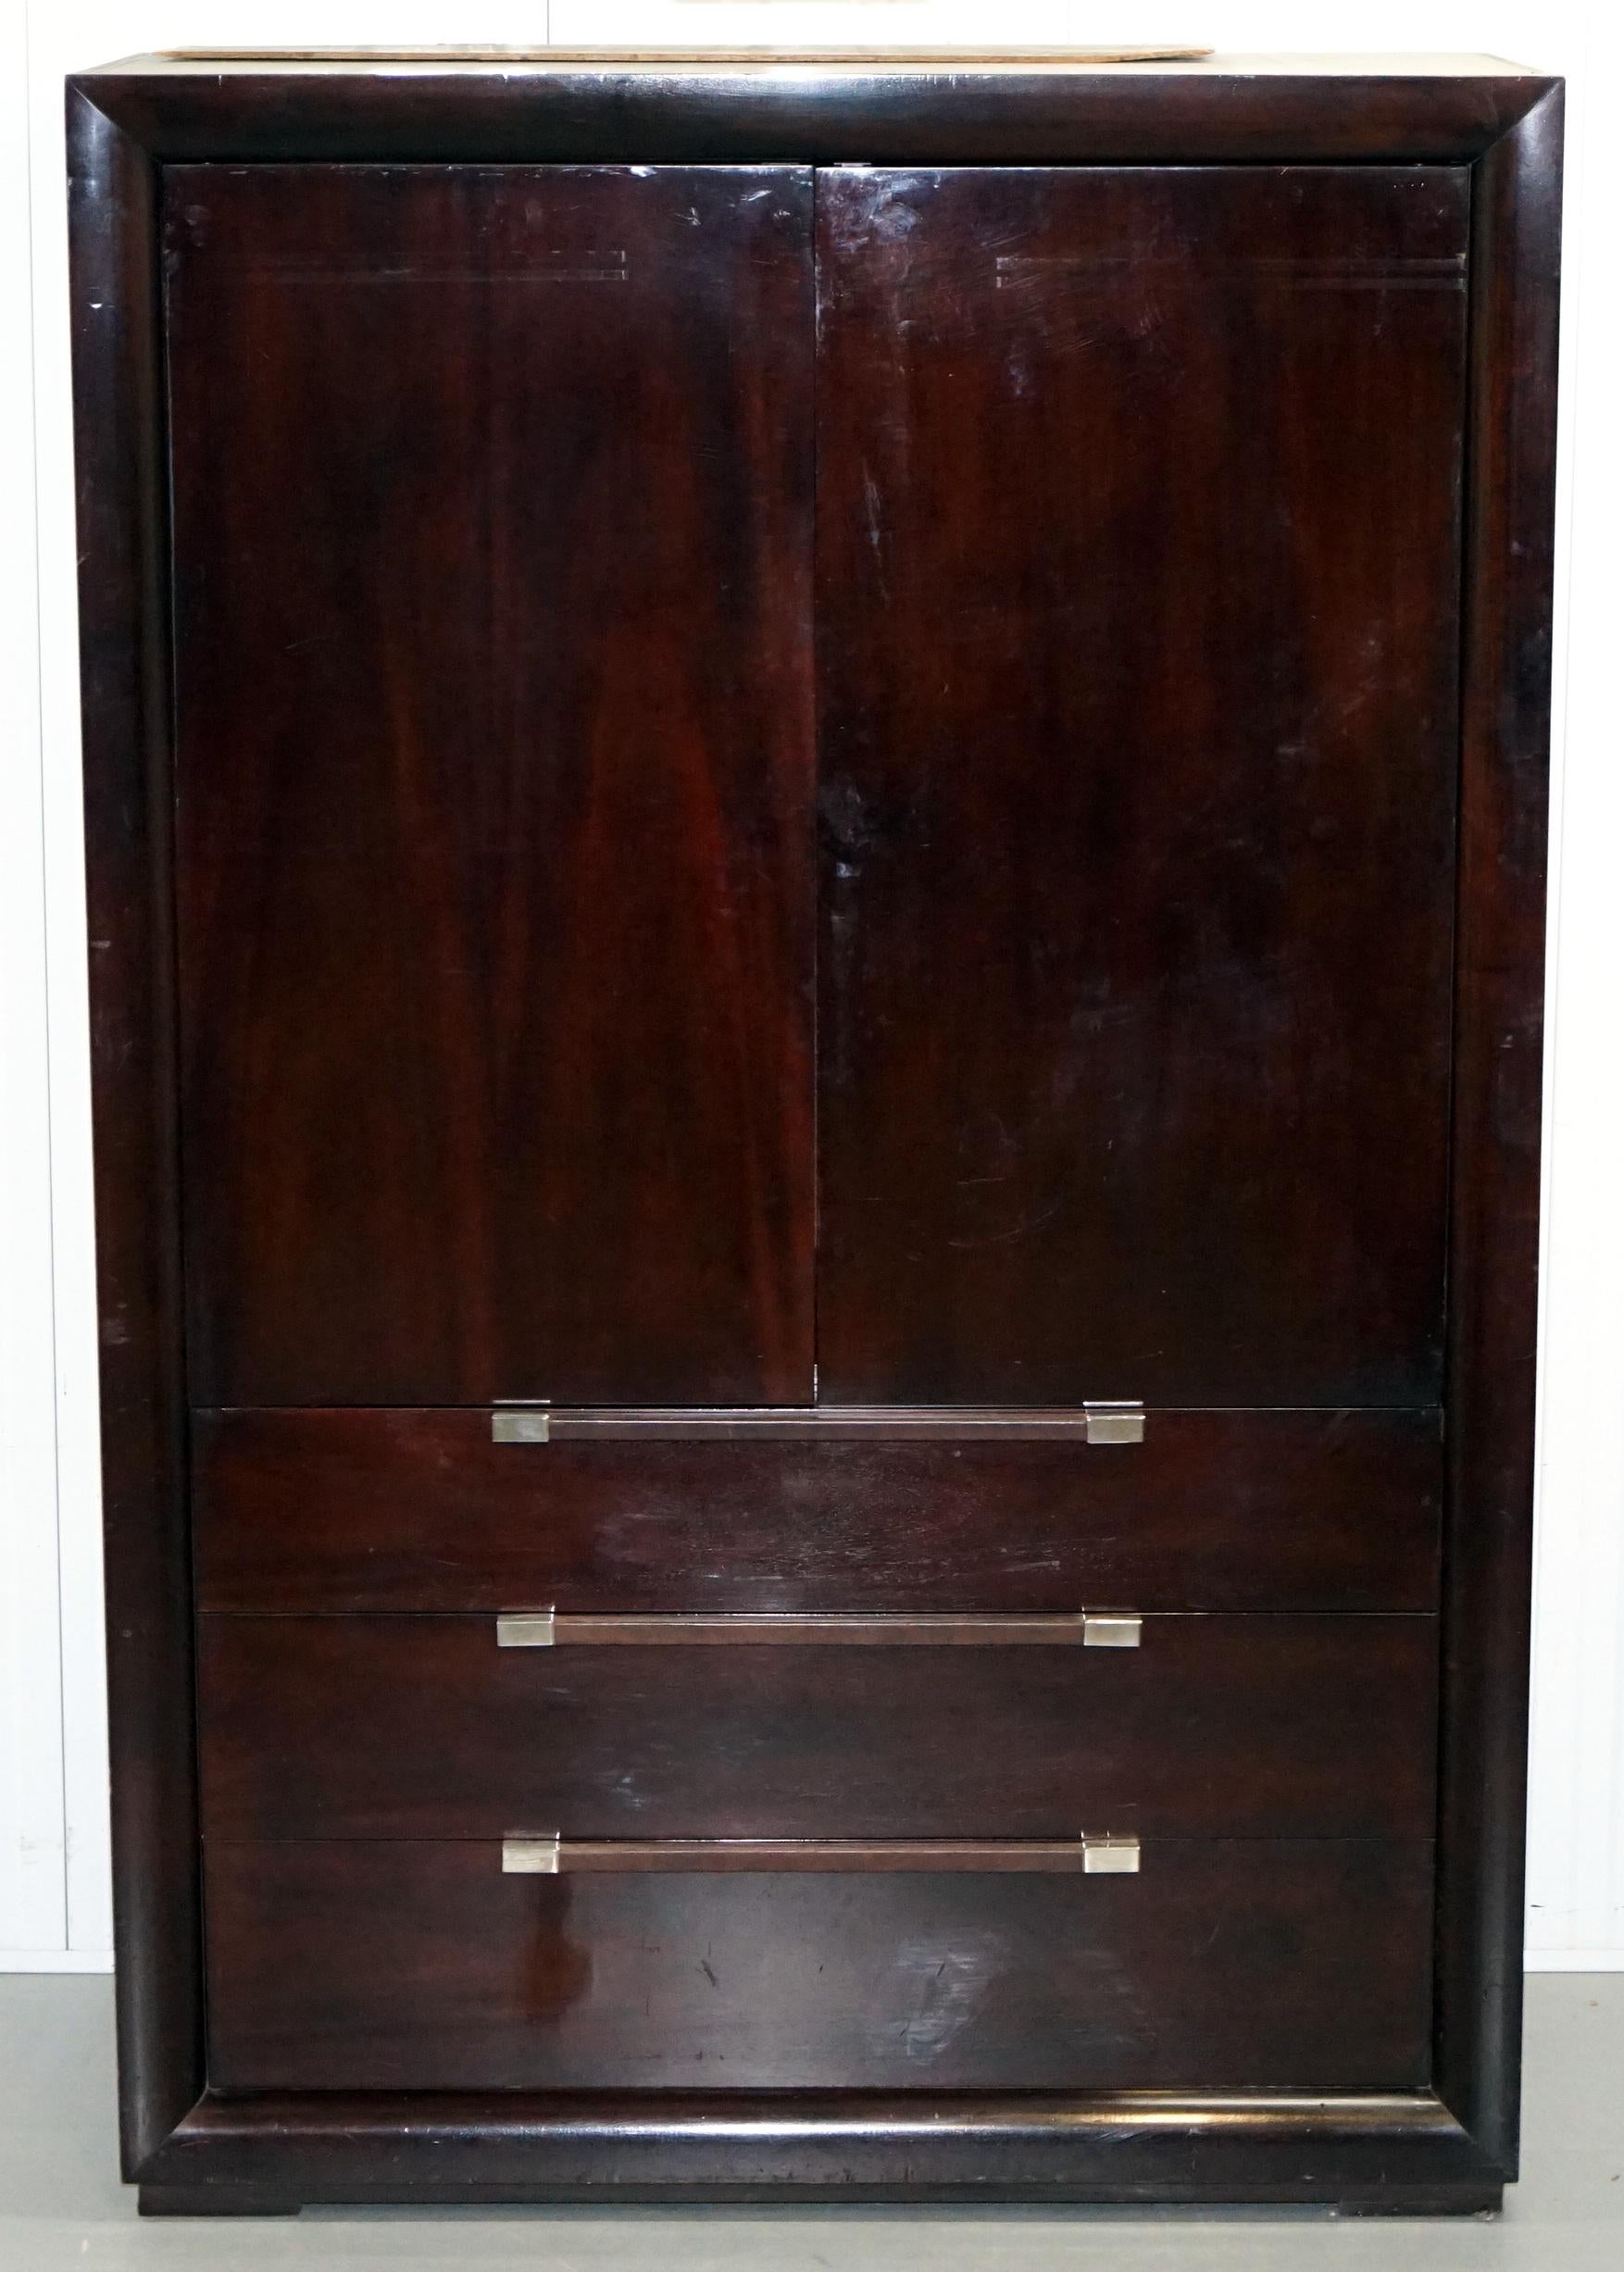 We are delighted to offer for sale this lovely solid Redwood Ralph Lauren Hudson Street wardrobe with drawers and bifold doors

This piece is a monster, its solid Redwood and weighs a tonne, the doors are bi-folding so they retract inside the